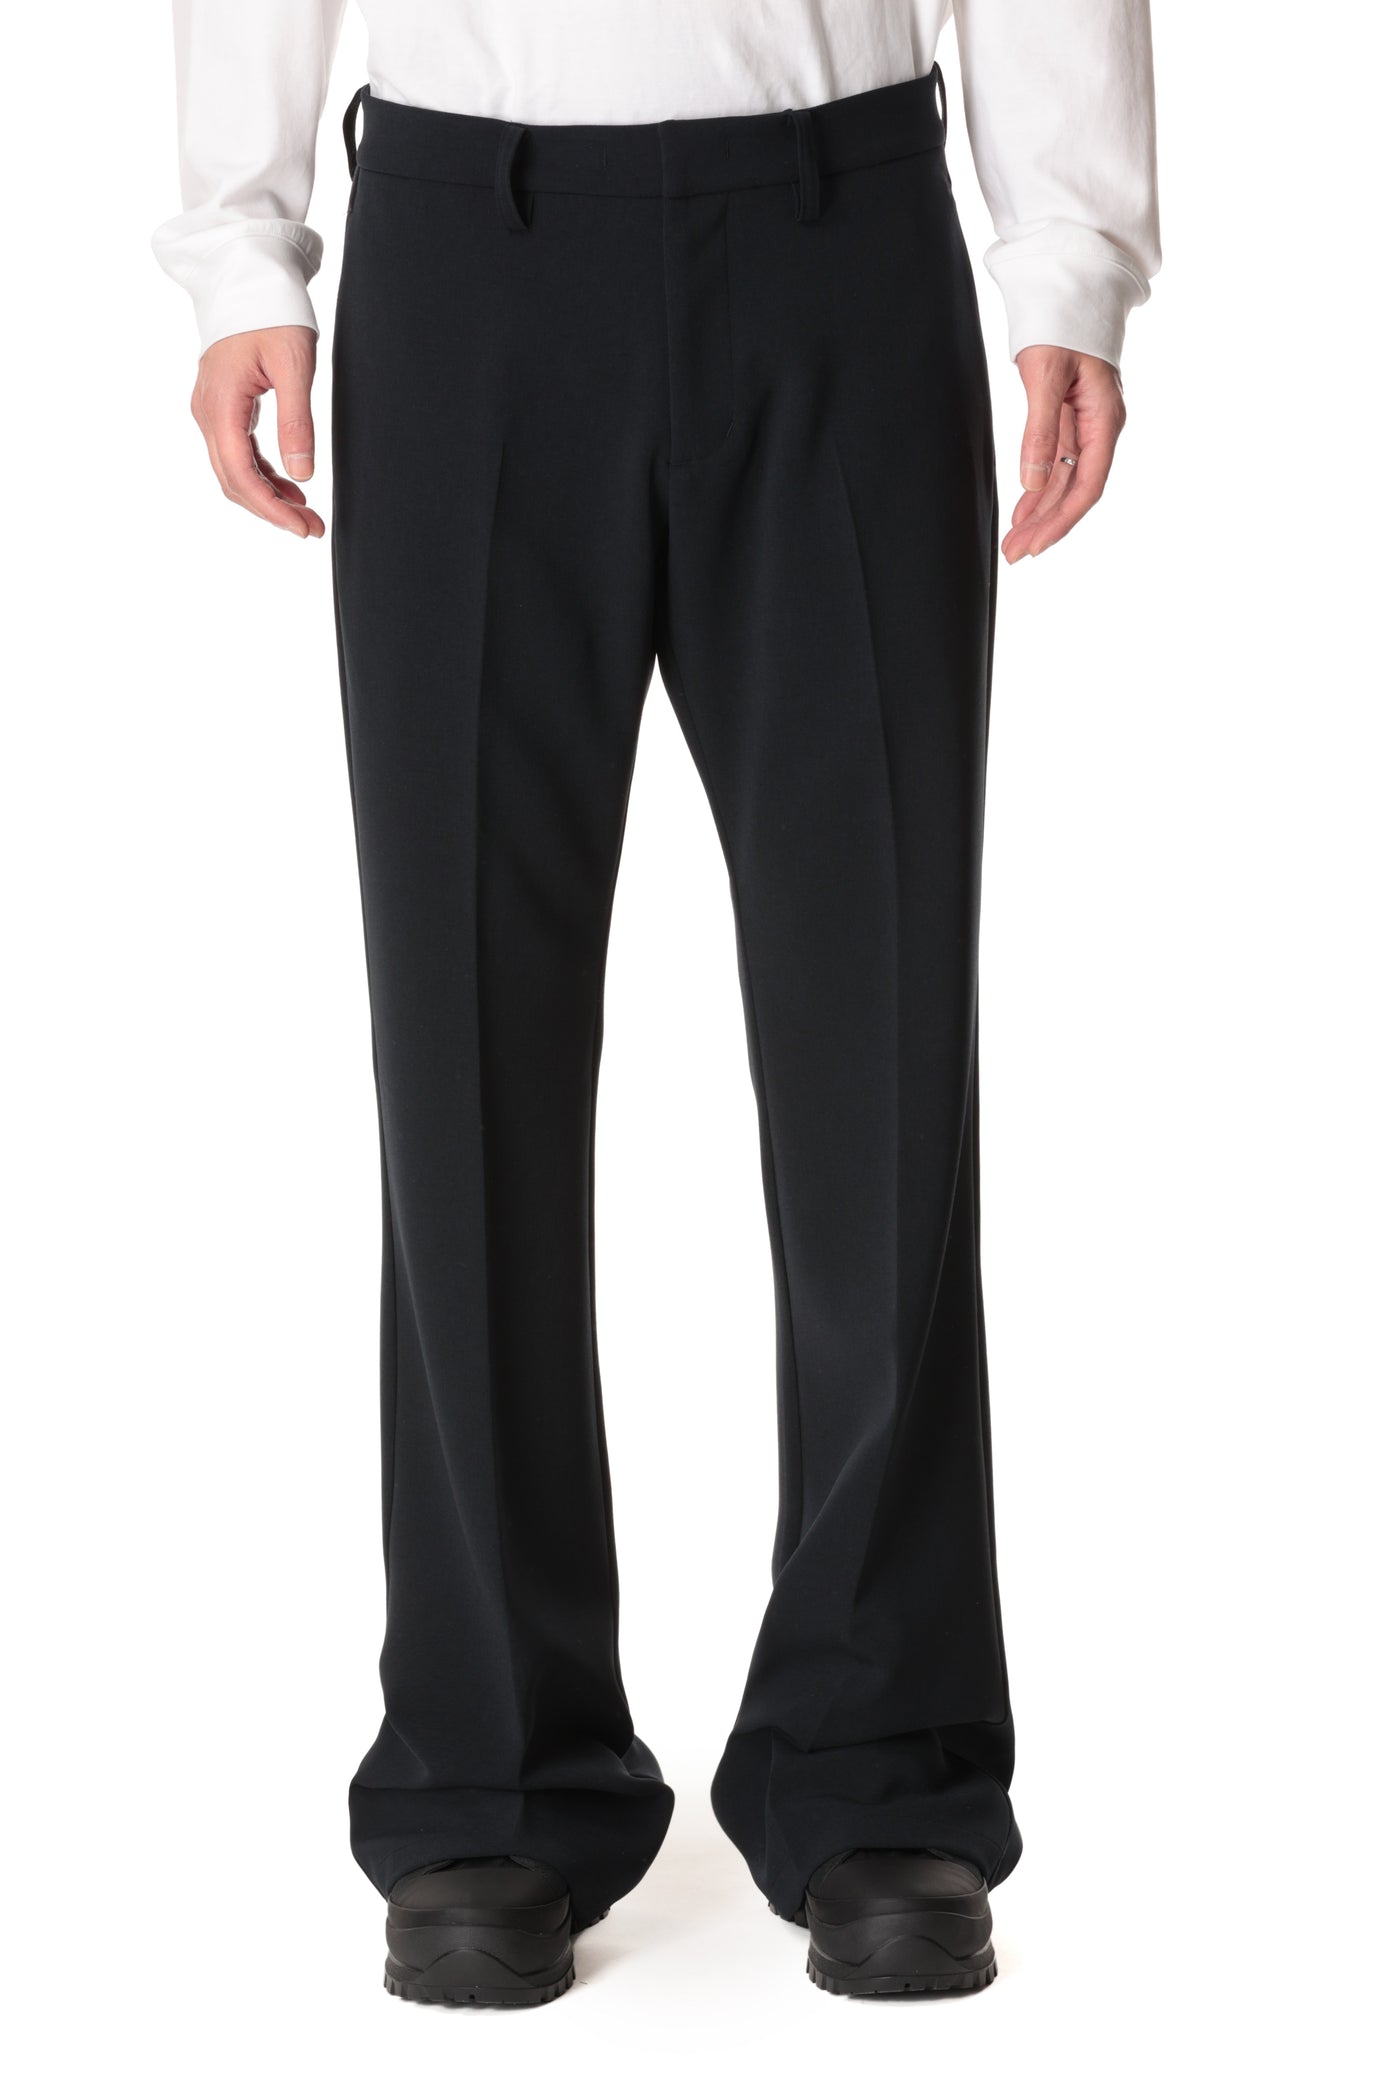 AP32-068 Polyester stretch double cross flare pants